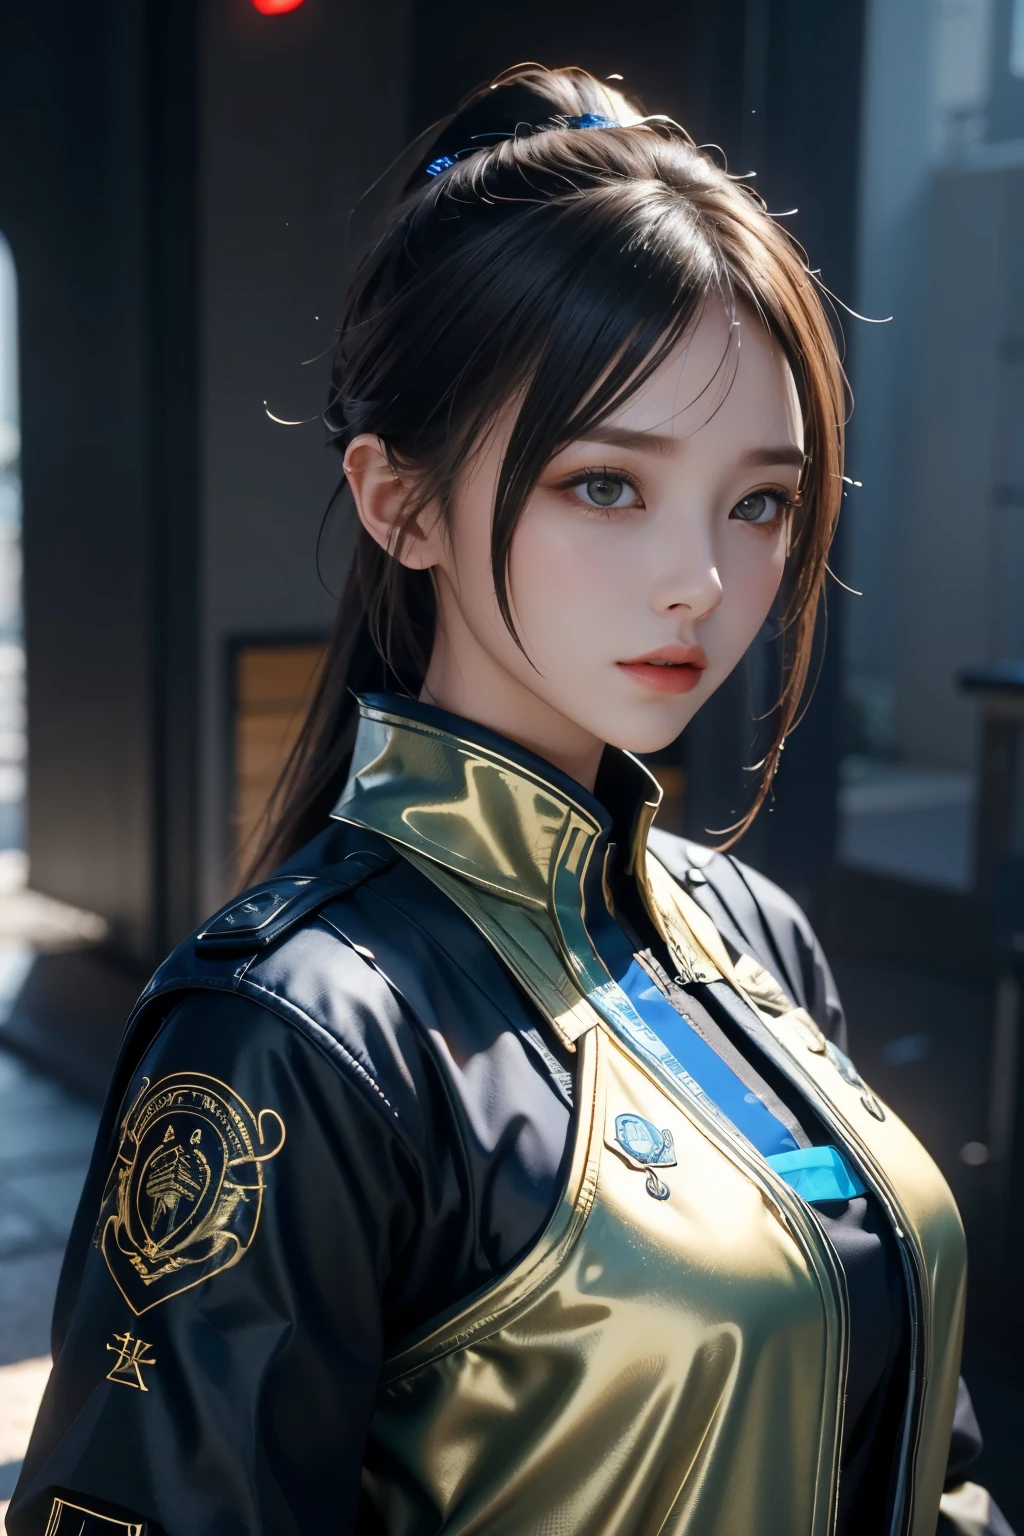 Game art，The best picture quality，Highest resolution，8K，((A bust photograph))，((Portrait))，(Rule of thirds)，Unreal Engine 5 rendering works， (The Girl of the Future)，(Female Warrior)，22-year-old girl，(A long ponytail hairstyle with shades of red and blue)，(A beautiful eye full of detail)，(Big breasts)，Elegant and charming，Smile，(frown)，(Clothes full of futuristic sci-fi style，Sweater，A delicate pattern，Glittering jewels，Armor)，Cyberpunk Characters，Future Style， Photo poses，Street background，Movie lights，Ray tracing，Game CG，((3D Unreal Engine))，oc rendering reflection pattern